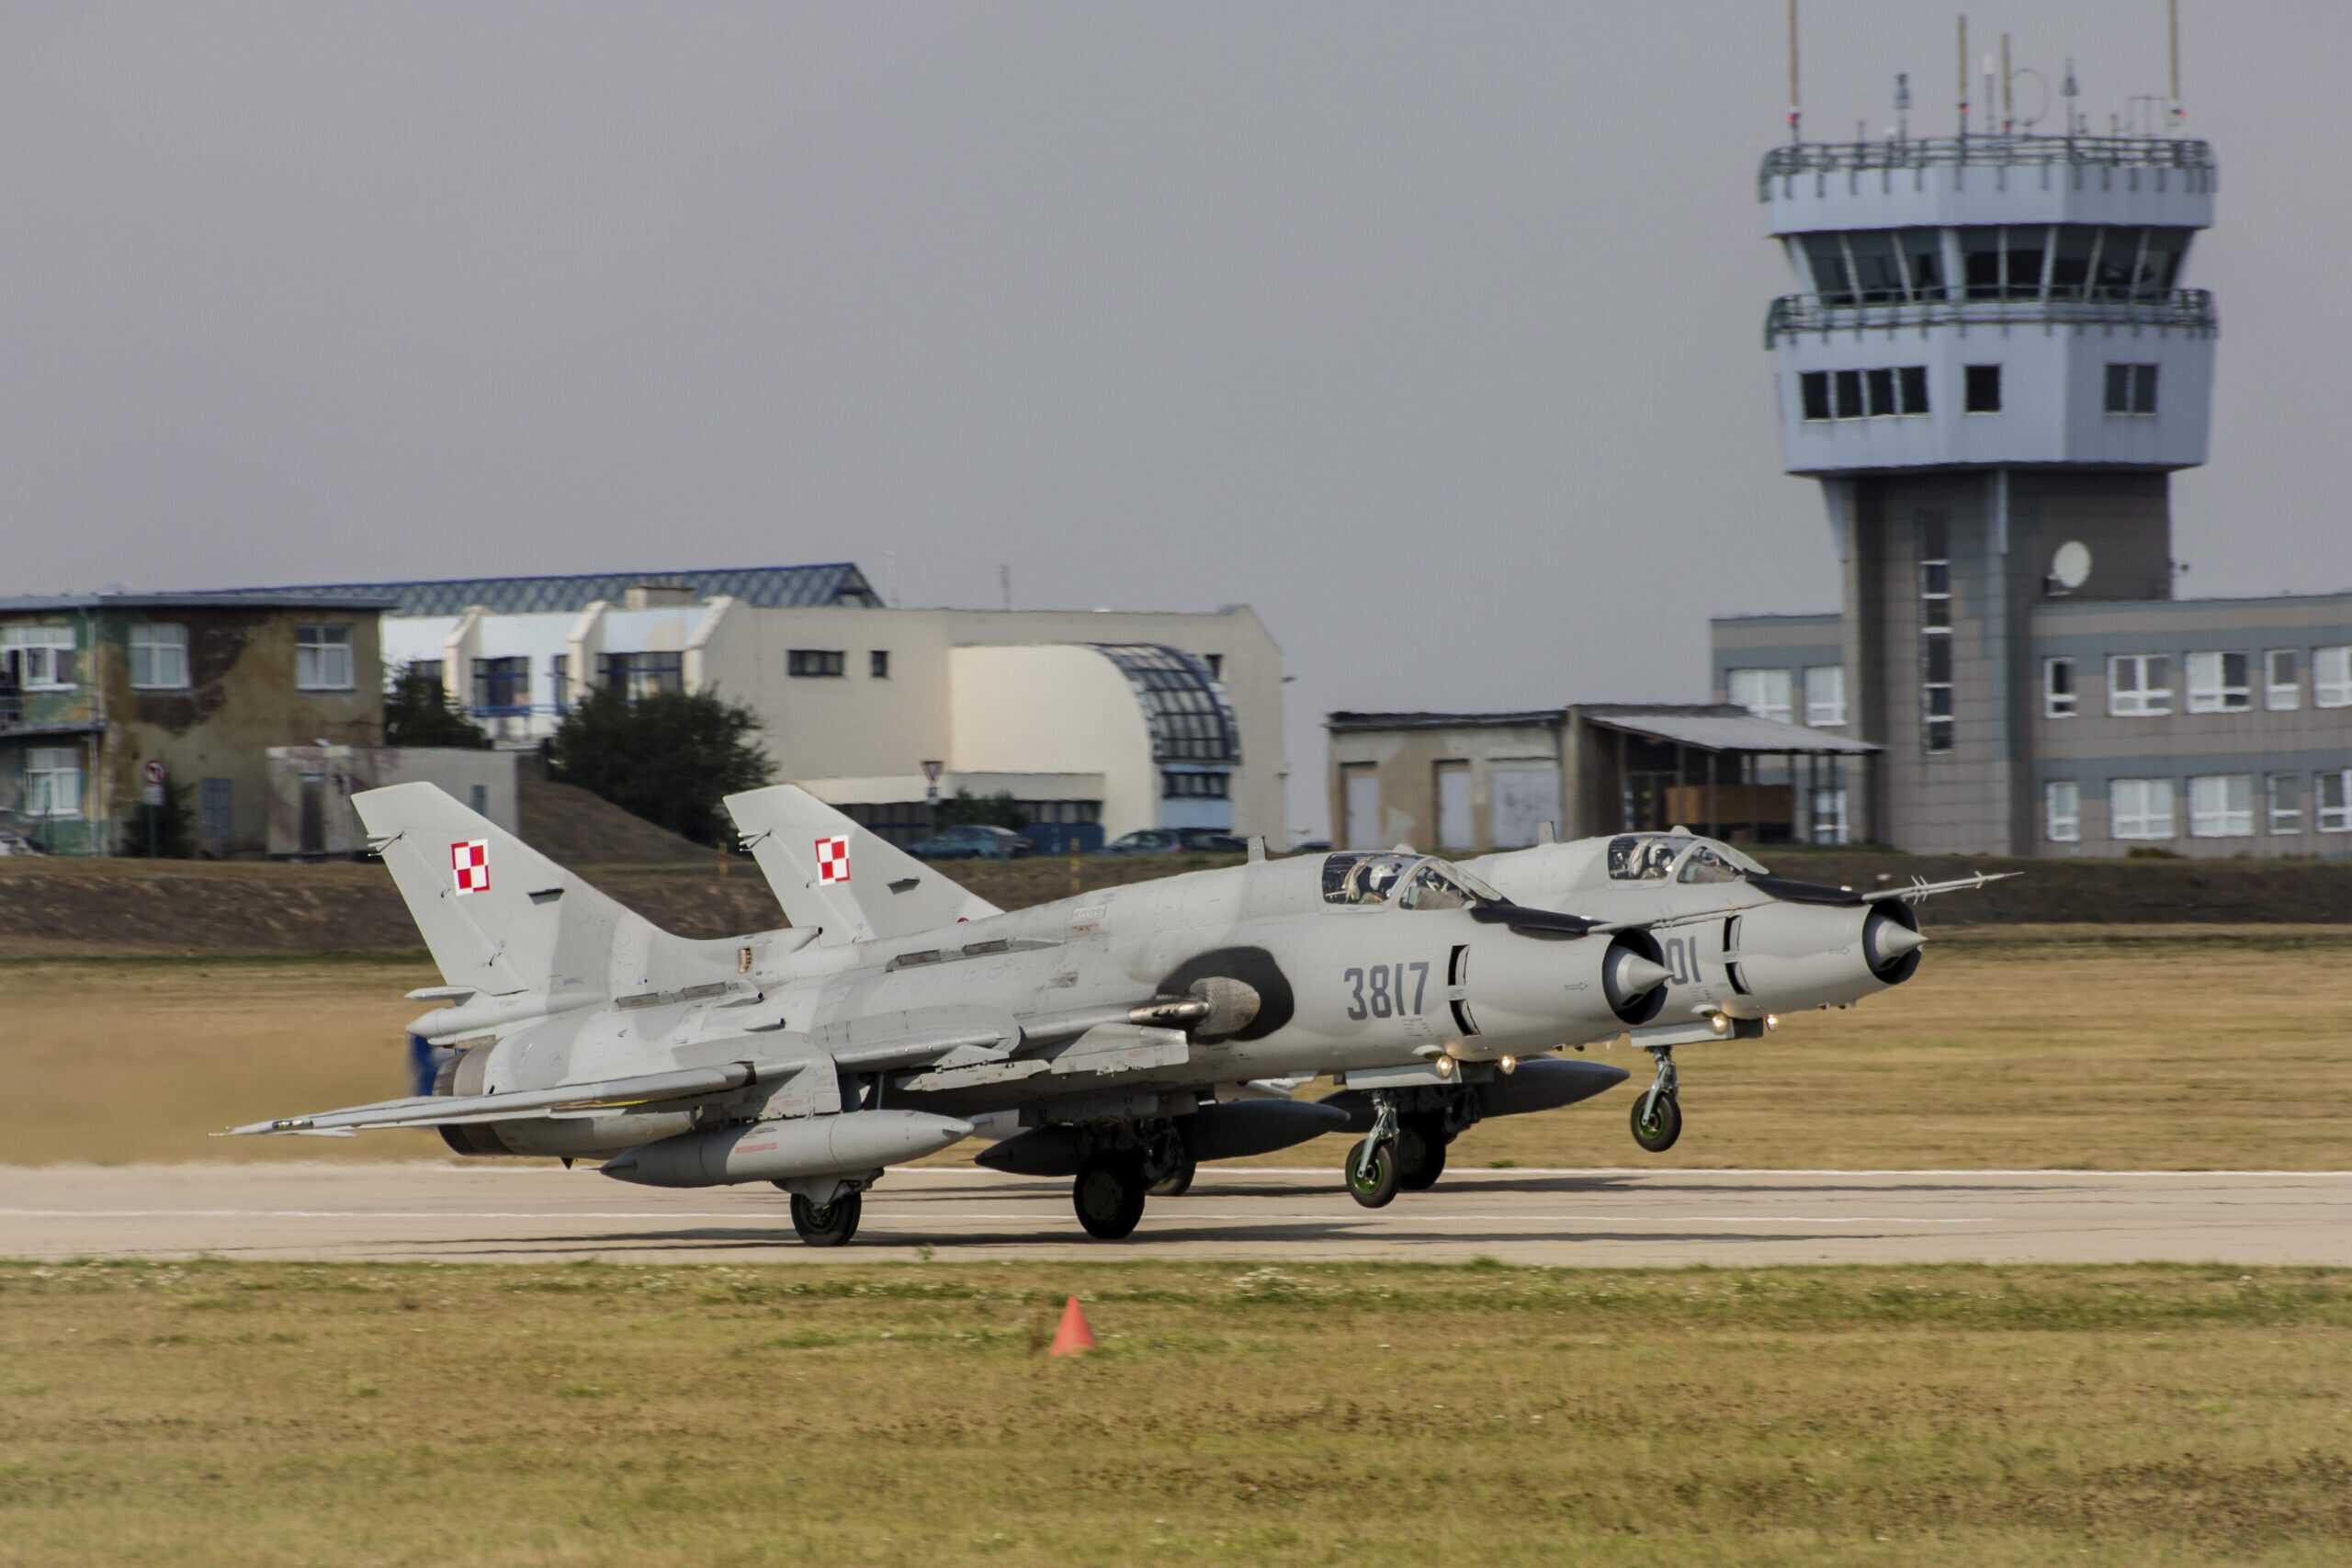 NATO Airfield | Two Polish Air Force Su-22 fighter-bombers at a NATO exercise.